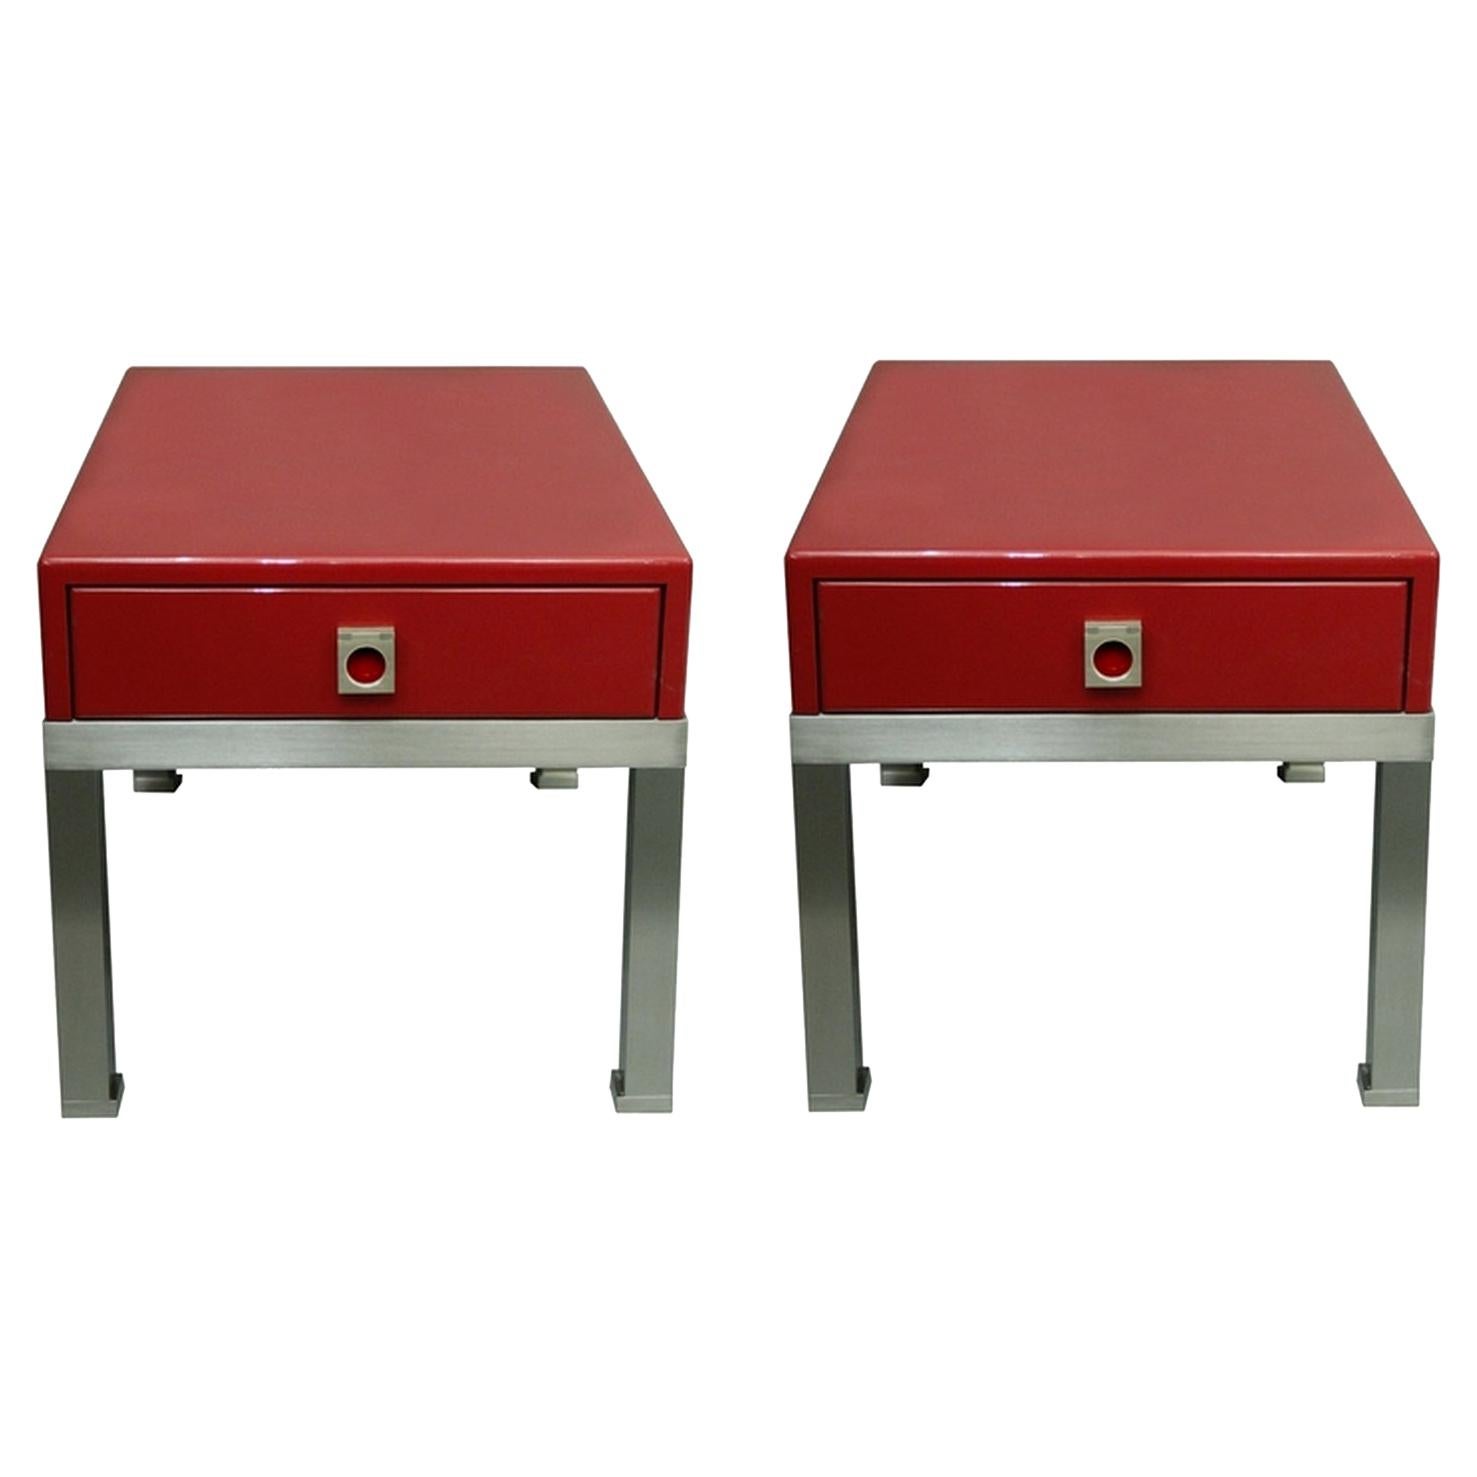 Pair of End Tables in Red Lacquer by Guy Lefevre for Maison Jansen, France 1970s